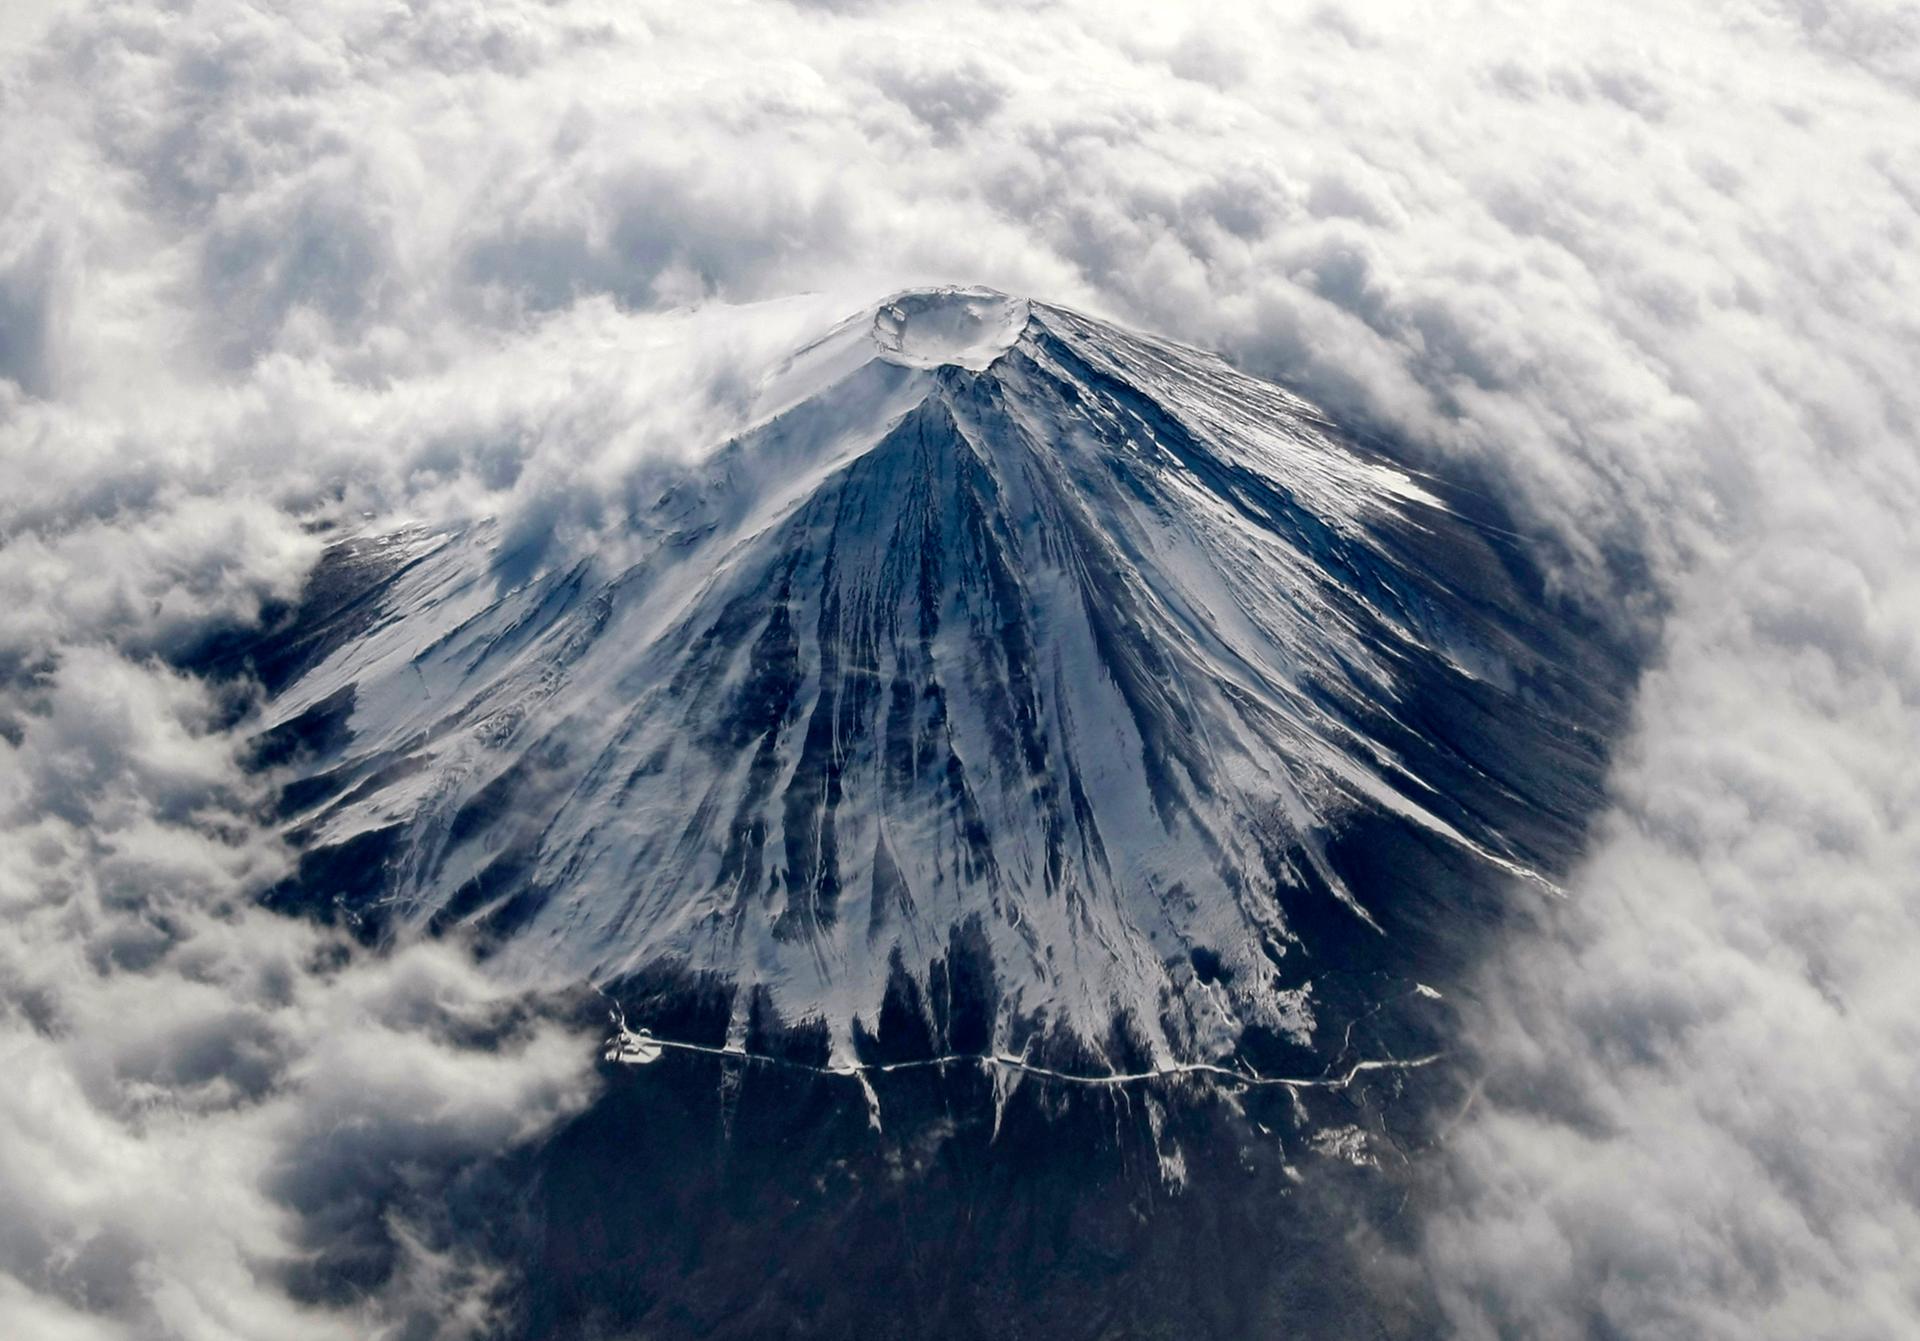 Japan's Mount Fuji, covered with snow and surrounded by cloud, is seen from an airplane February 2, 2010. Mount Fuji, at 3,776 metres (12,388 ft) is Japan's highest mountain. 